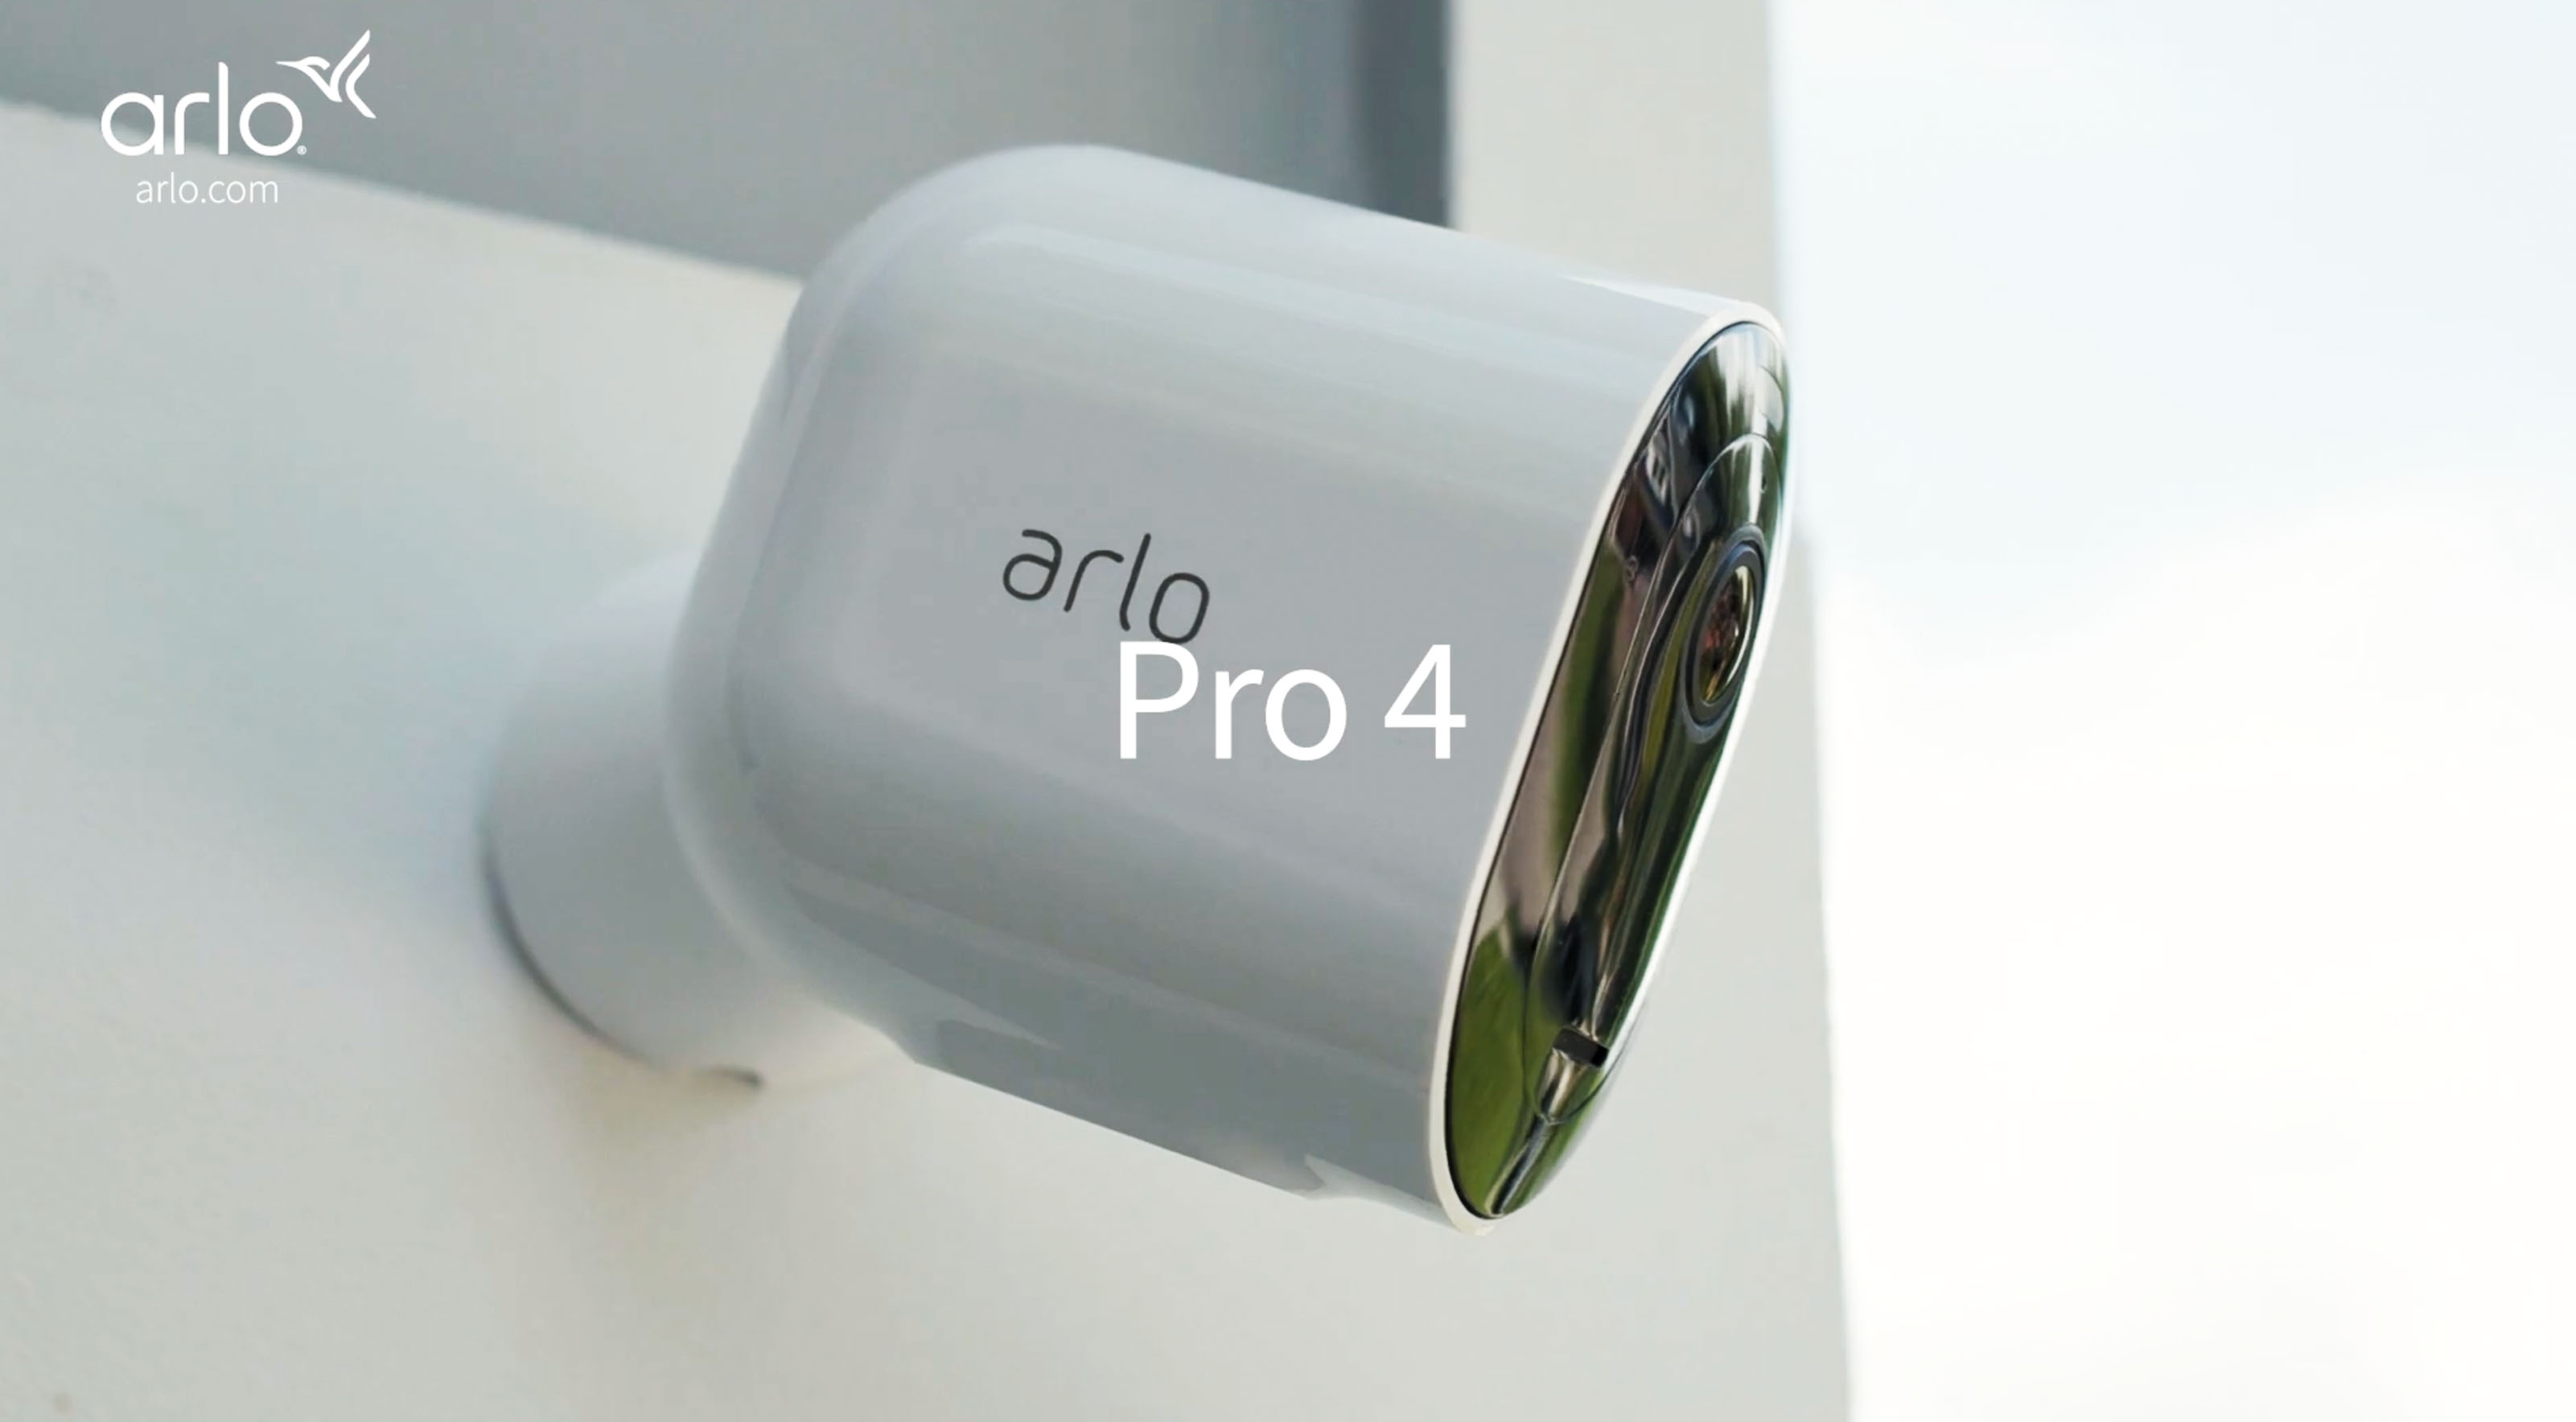 Arlo Pro 4 outdoor security camera YouTube video United Kingdom UK Watch Now 